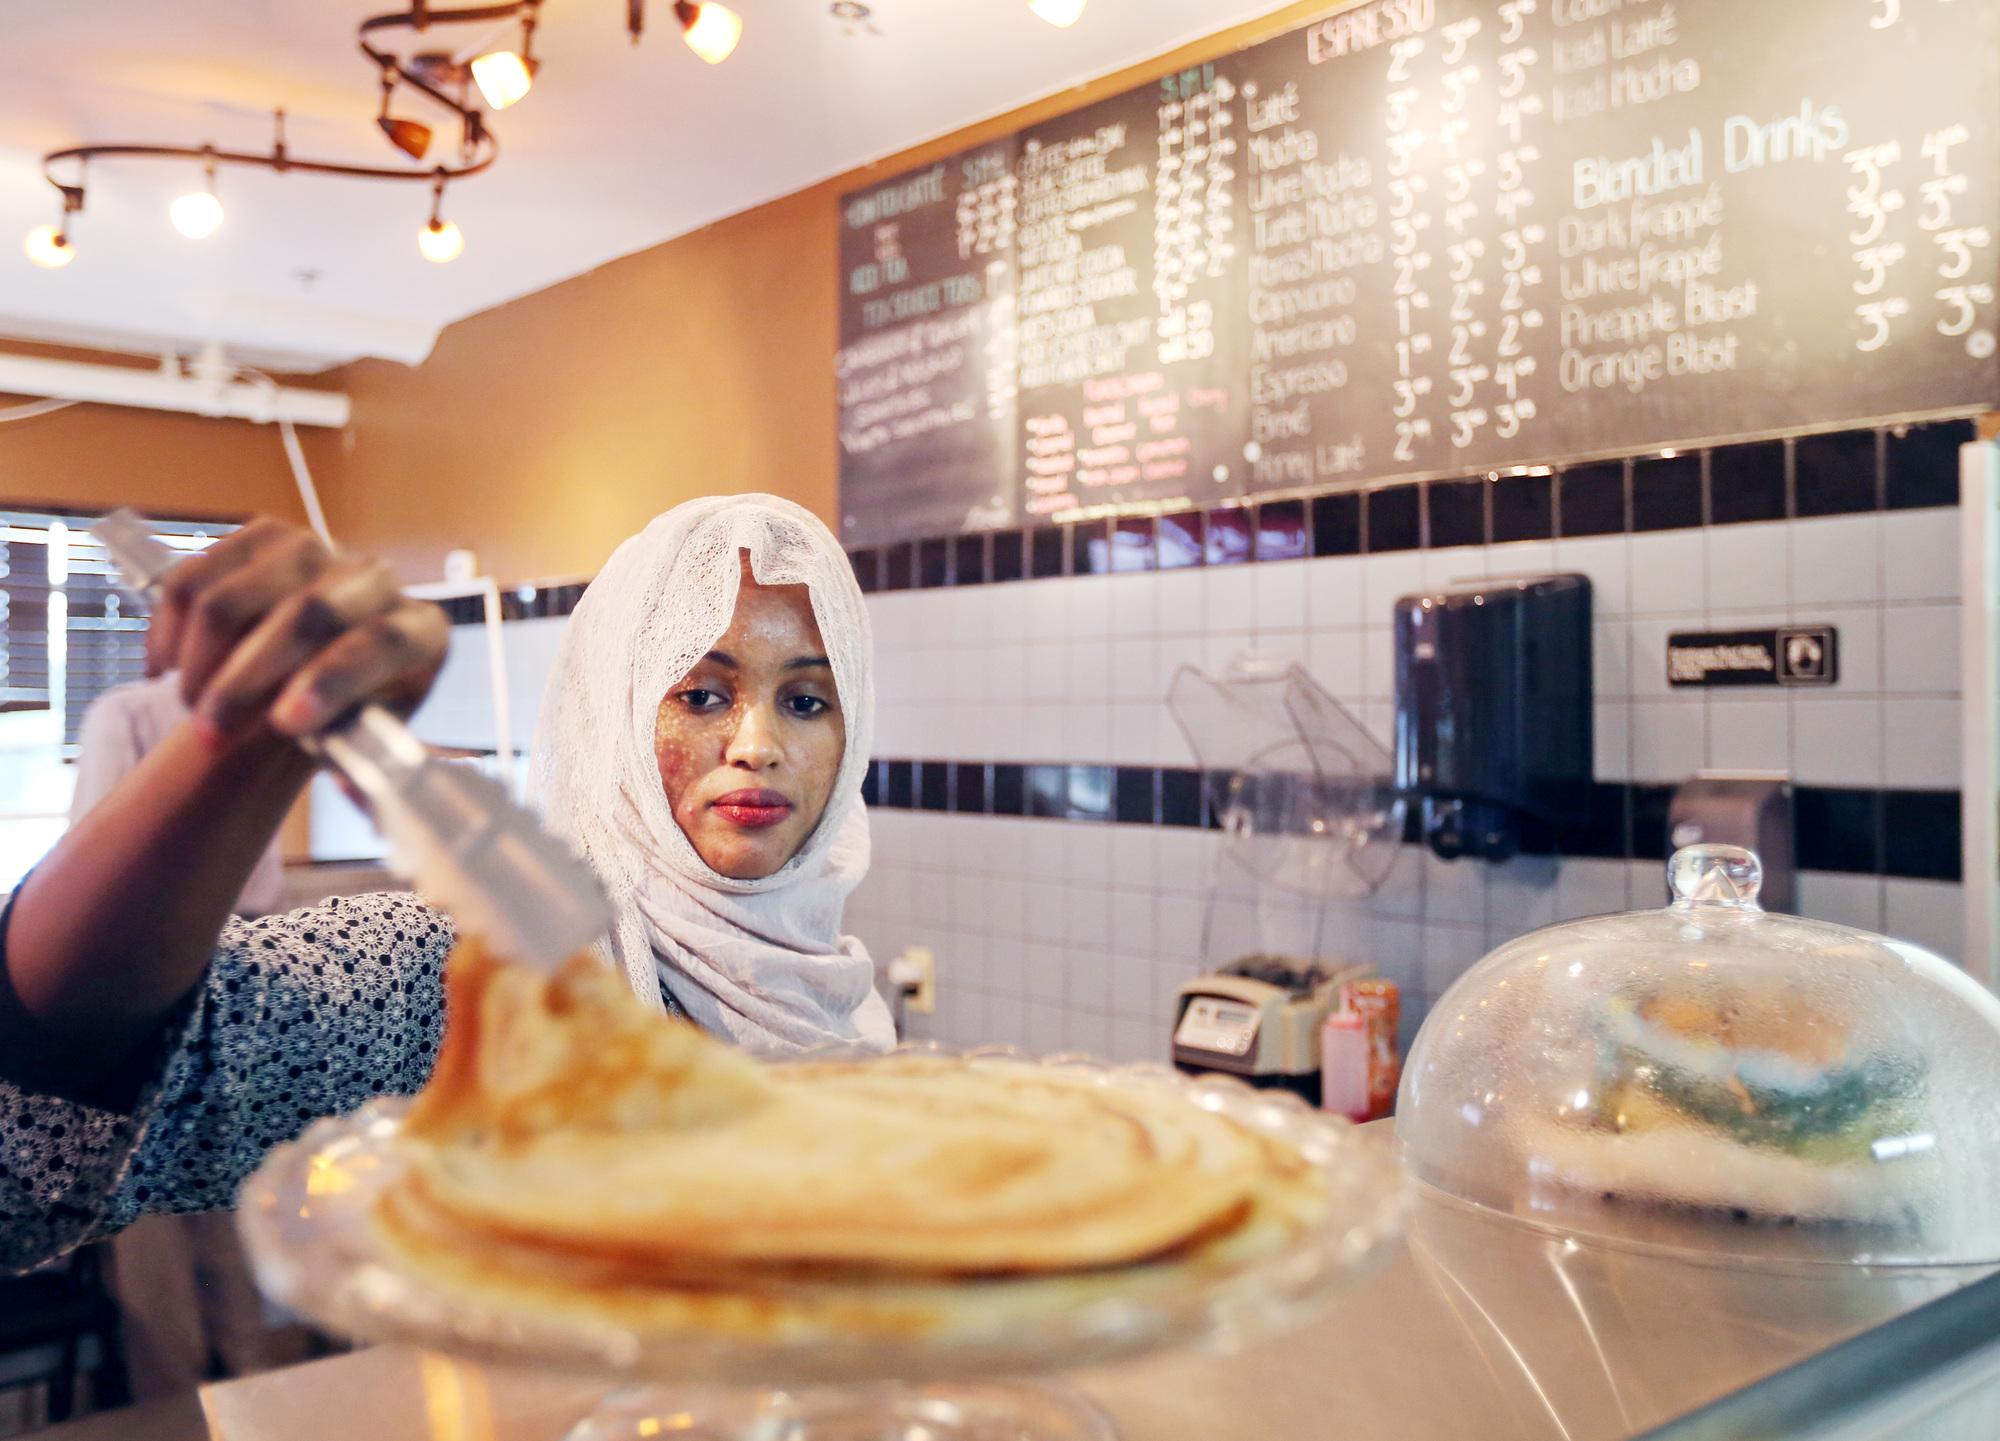 Bulbulo Mohamud lifted a piece of malawax (similar to a pancake) for a customer at her cafe.